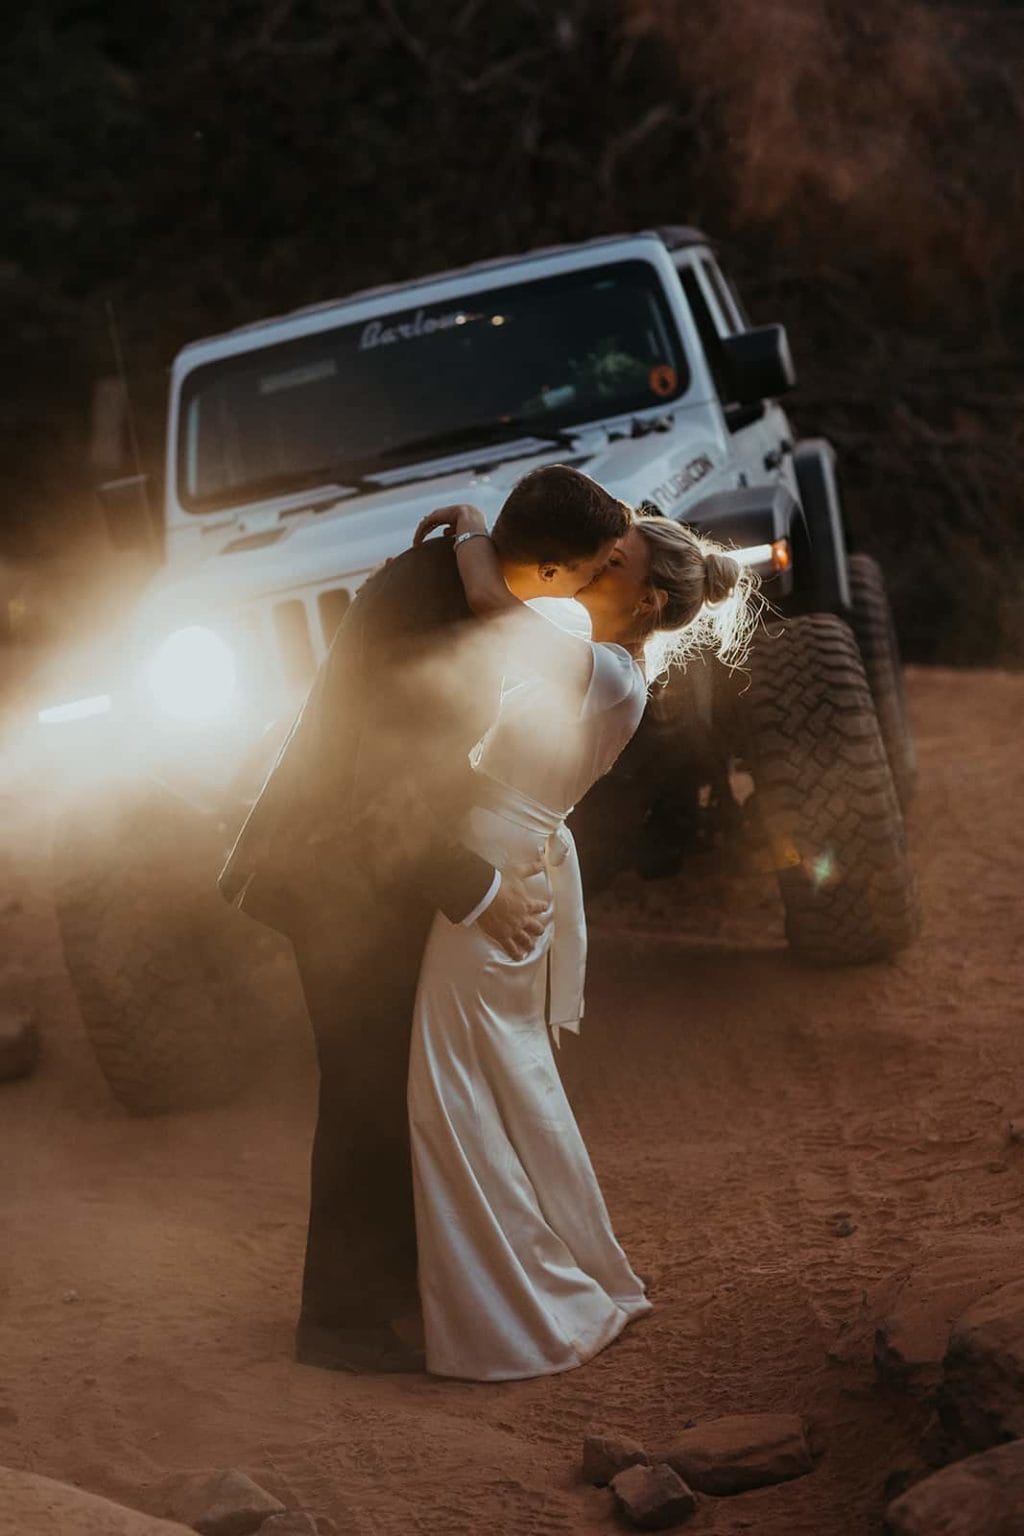 A couple kisses in front of the jeep headlights.